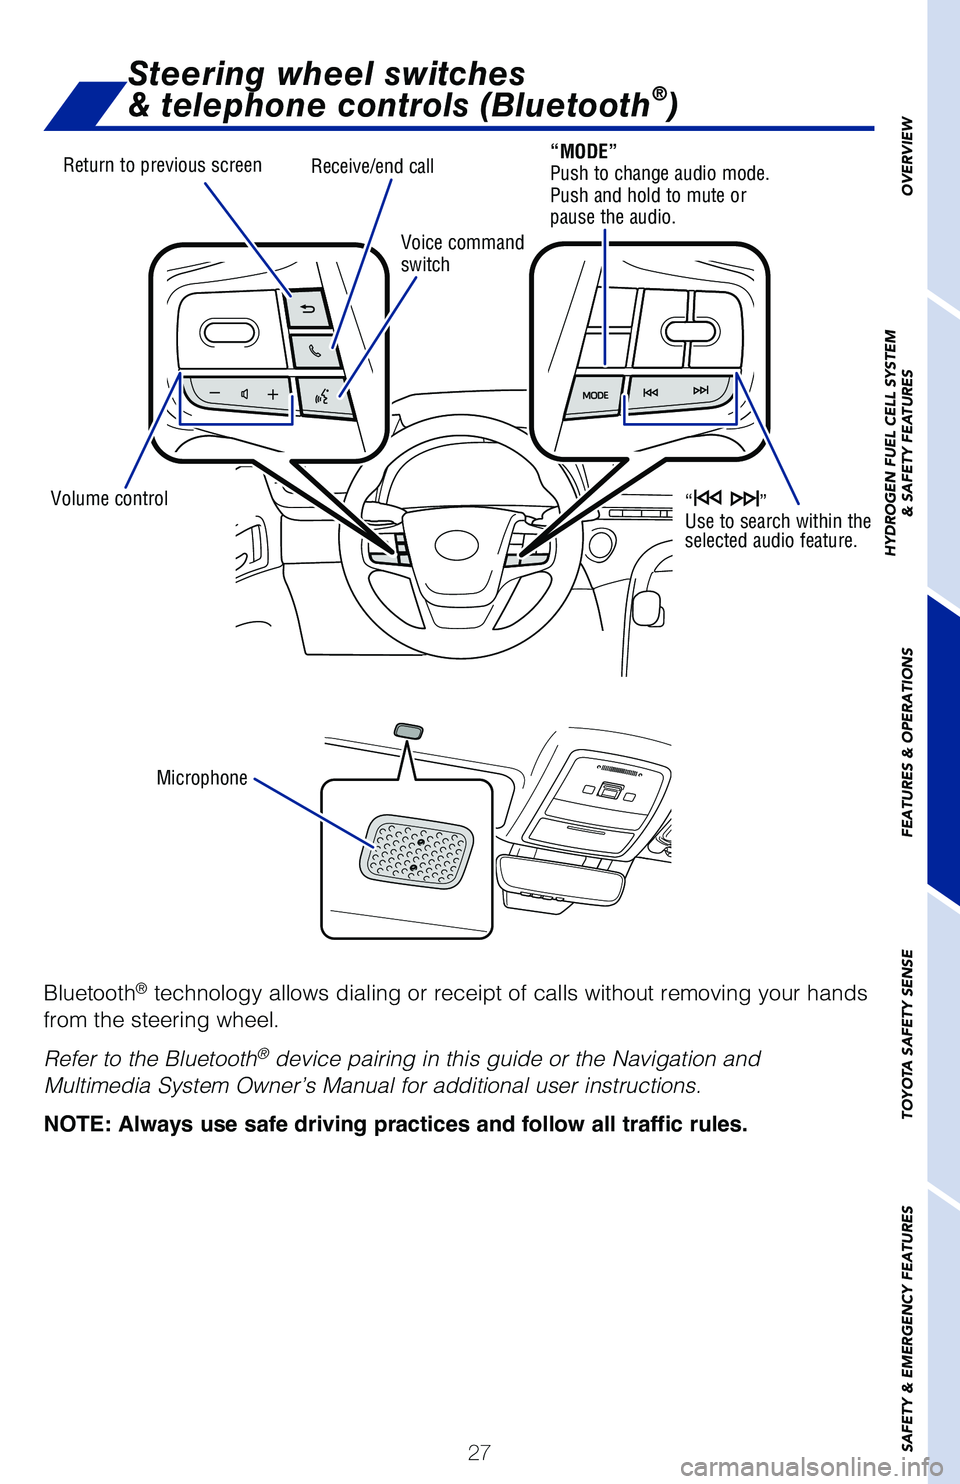 TOYOTA MIRAI 2021   (in English) User Guide 27
OVERVIEW
HYDROGEN FUEL CELL SYSTEM
& SAFETY FEATURES
FEATURES & OPERATIONS
TOYOTA SAFETY SENSE
SAFETY & EMERGENCY FEATURES
Steering wheel switches  
& telephone controls (Bluetooth®)
Bluetooth® t